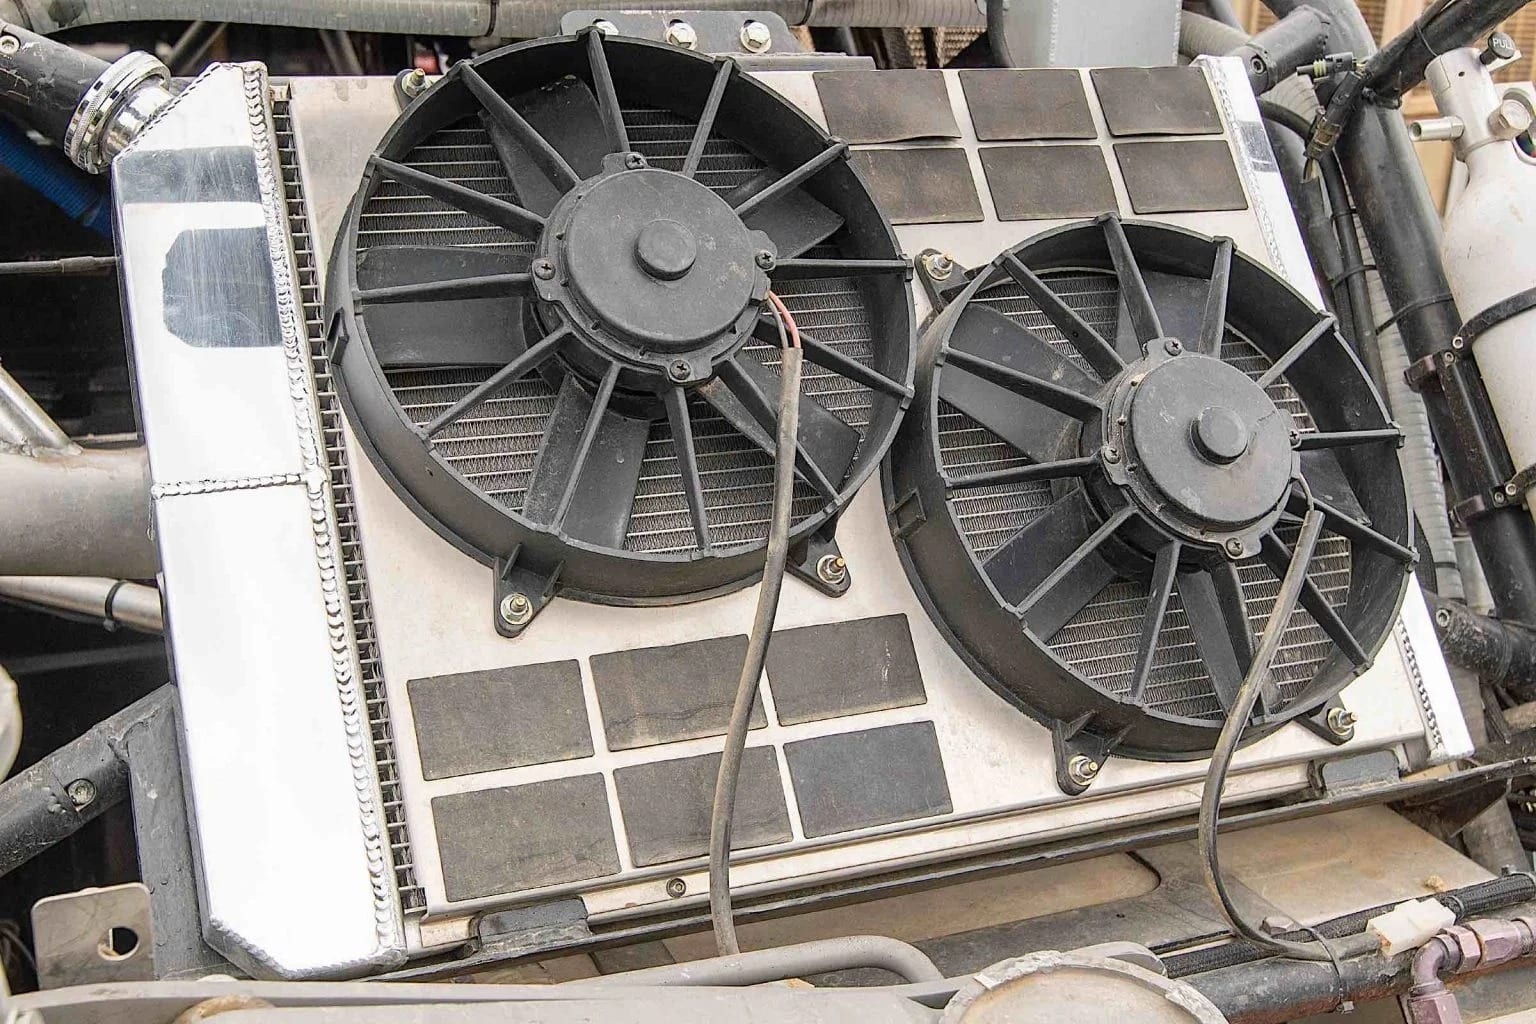 Two fans on a radiator mount.